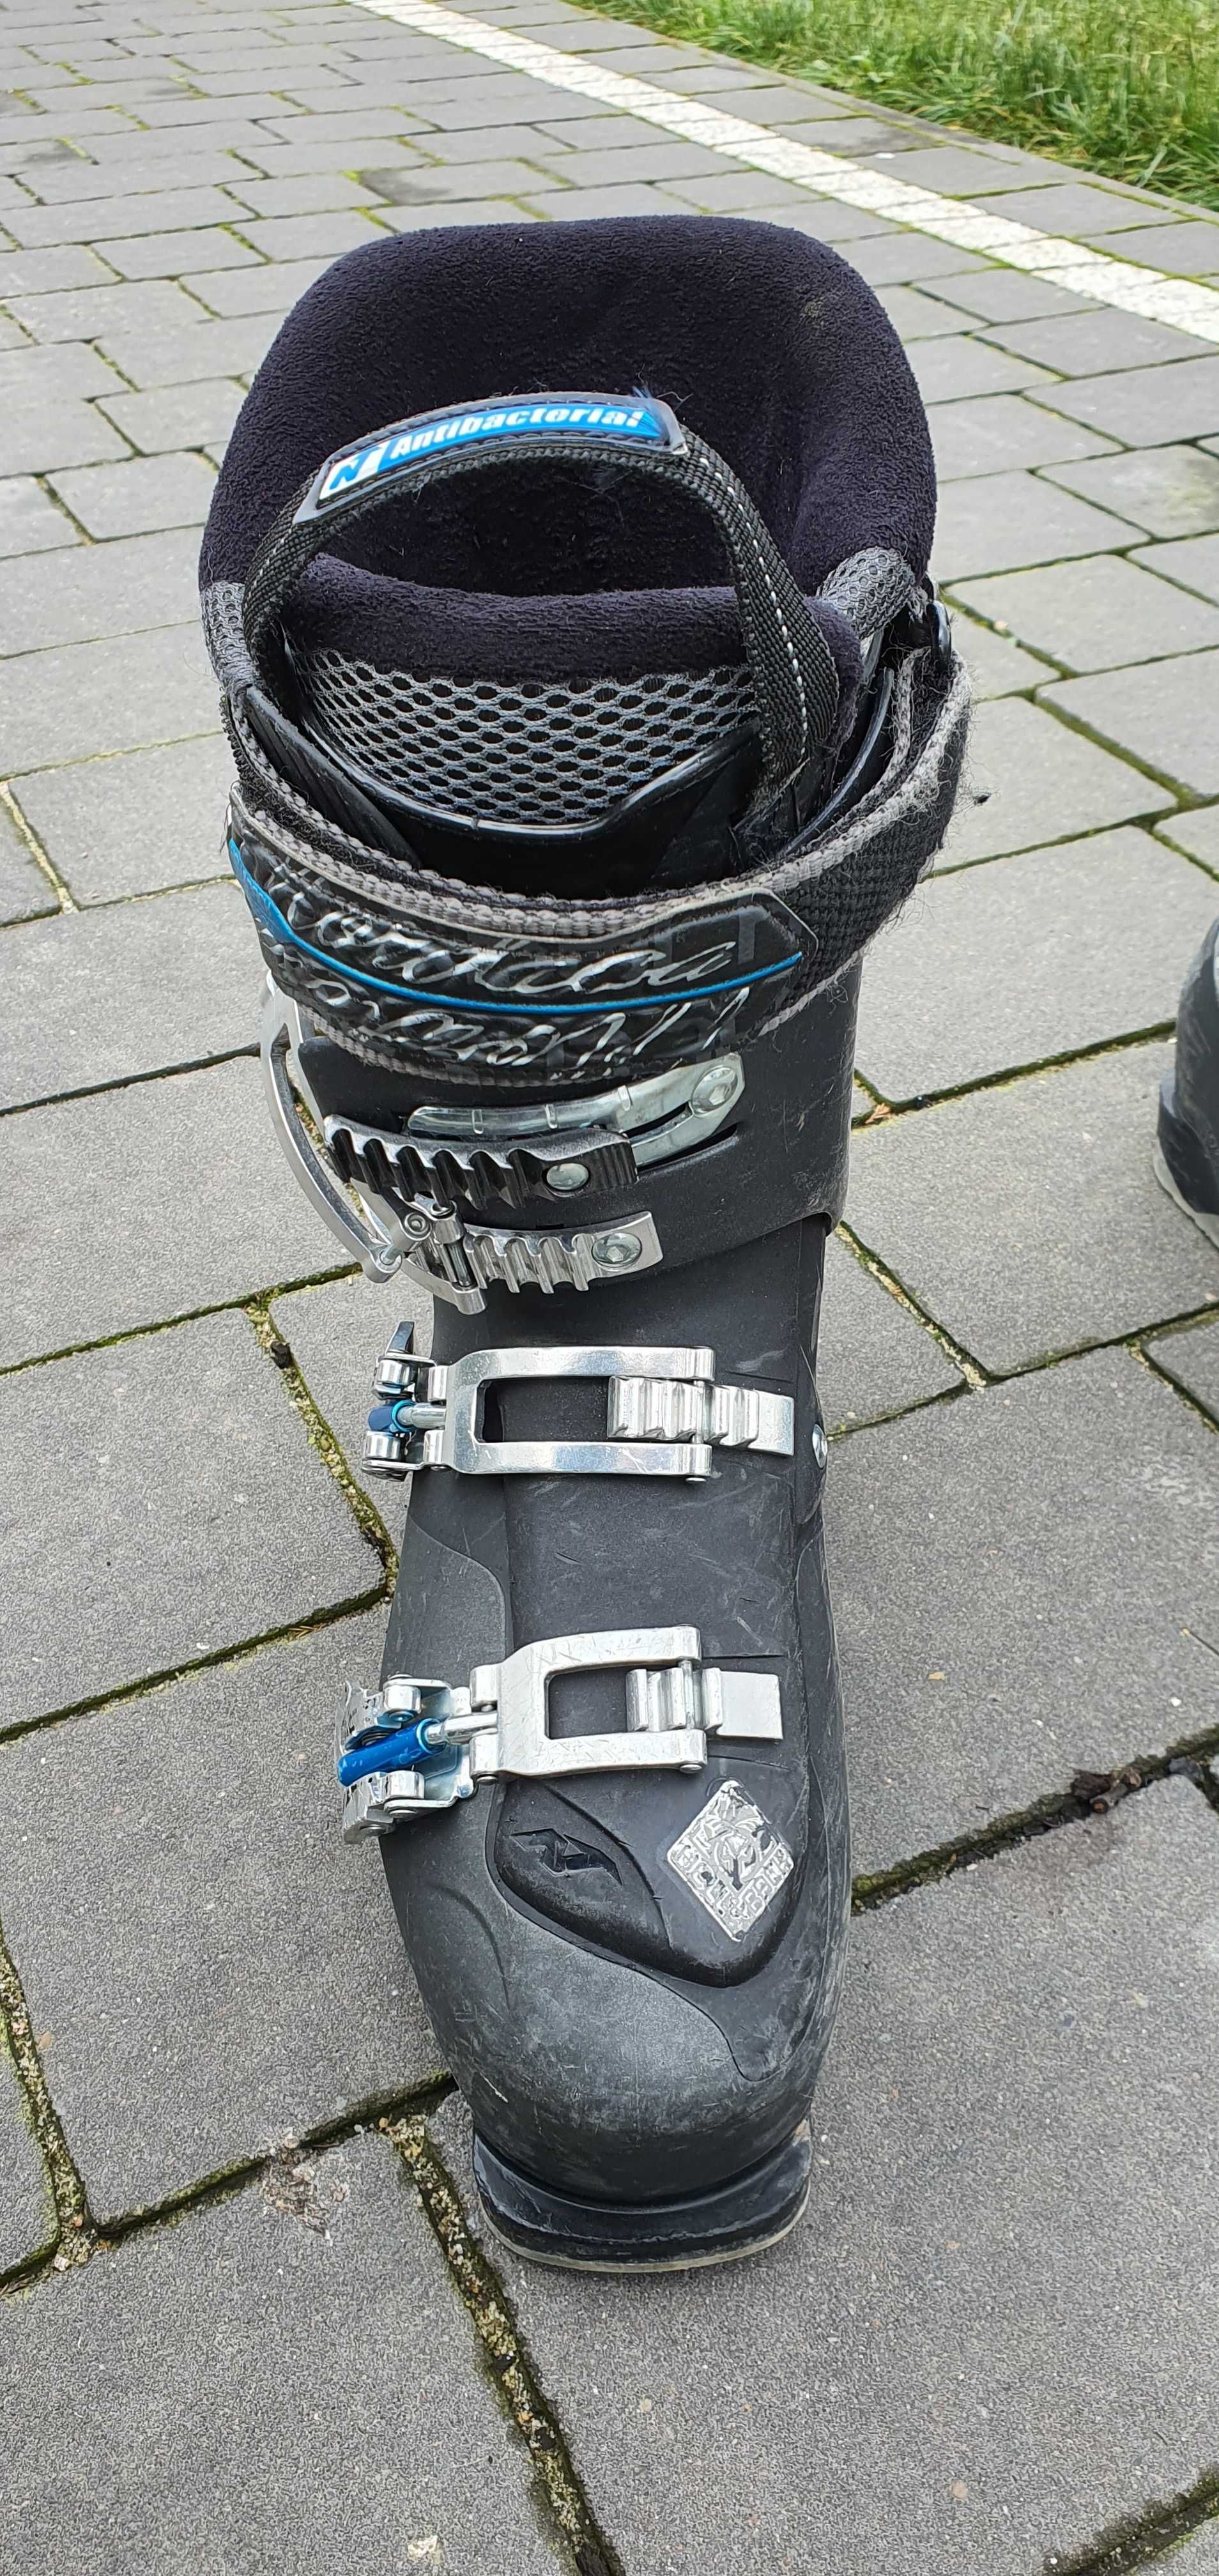 Buty Narciarskie Nordica Hell & Back h3r 25/25.5 300mm